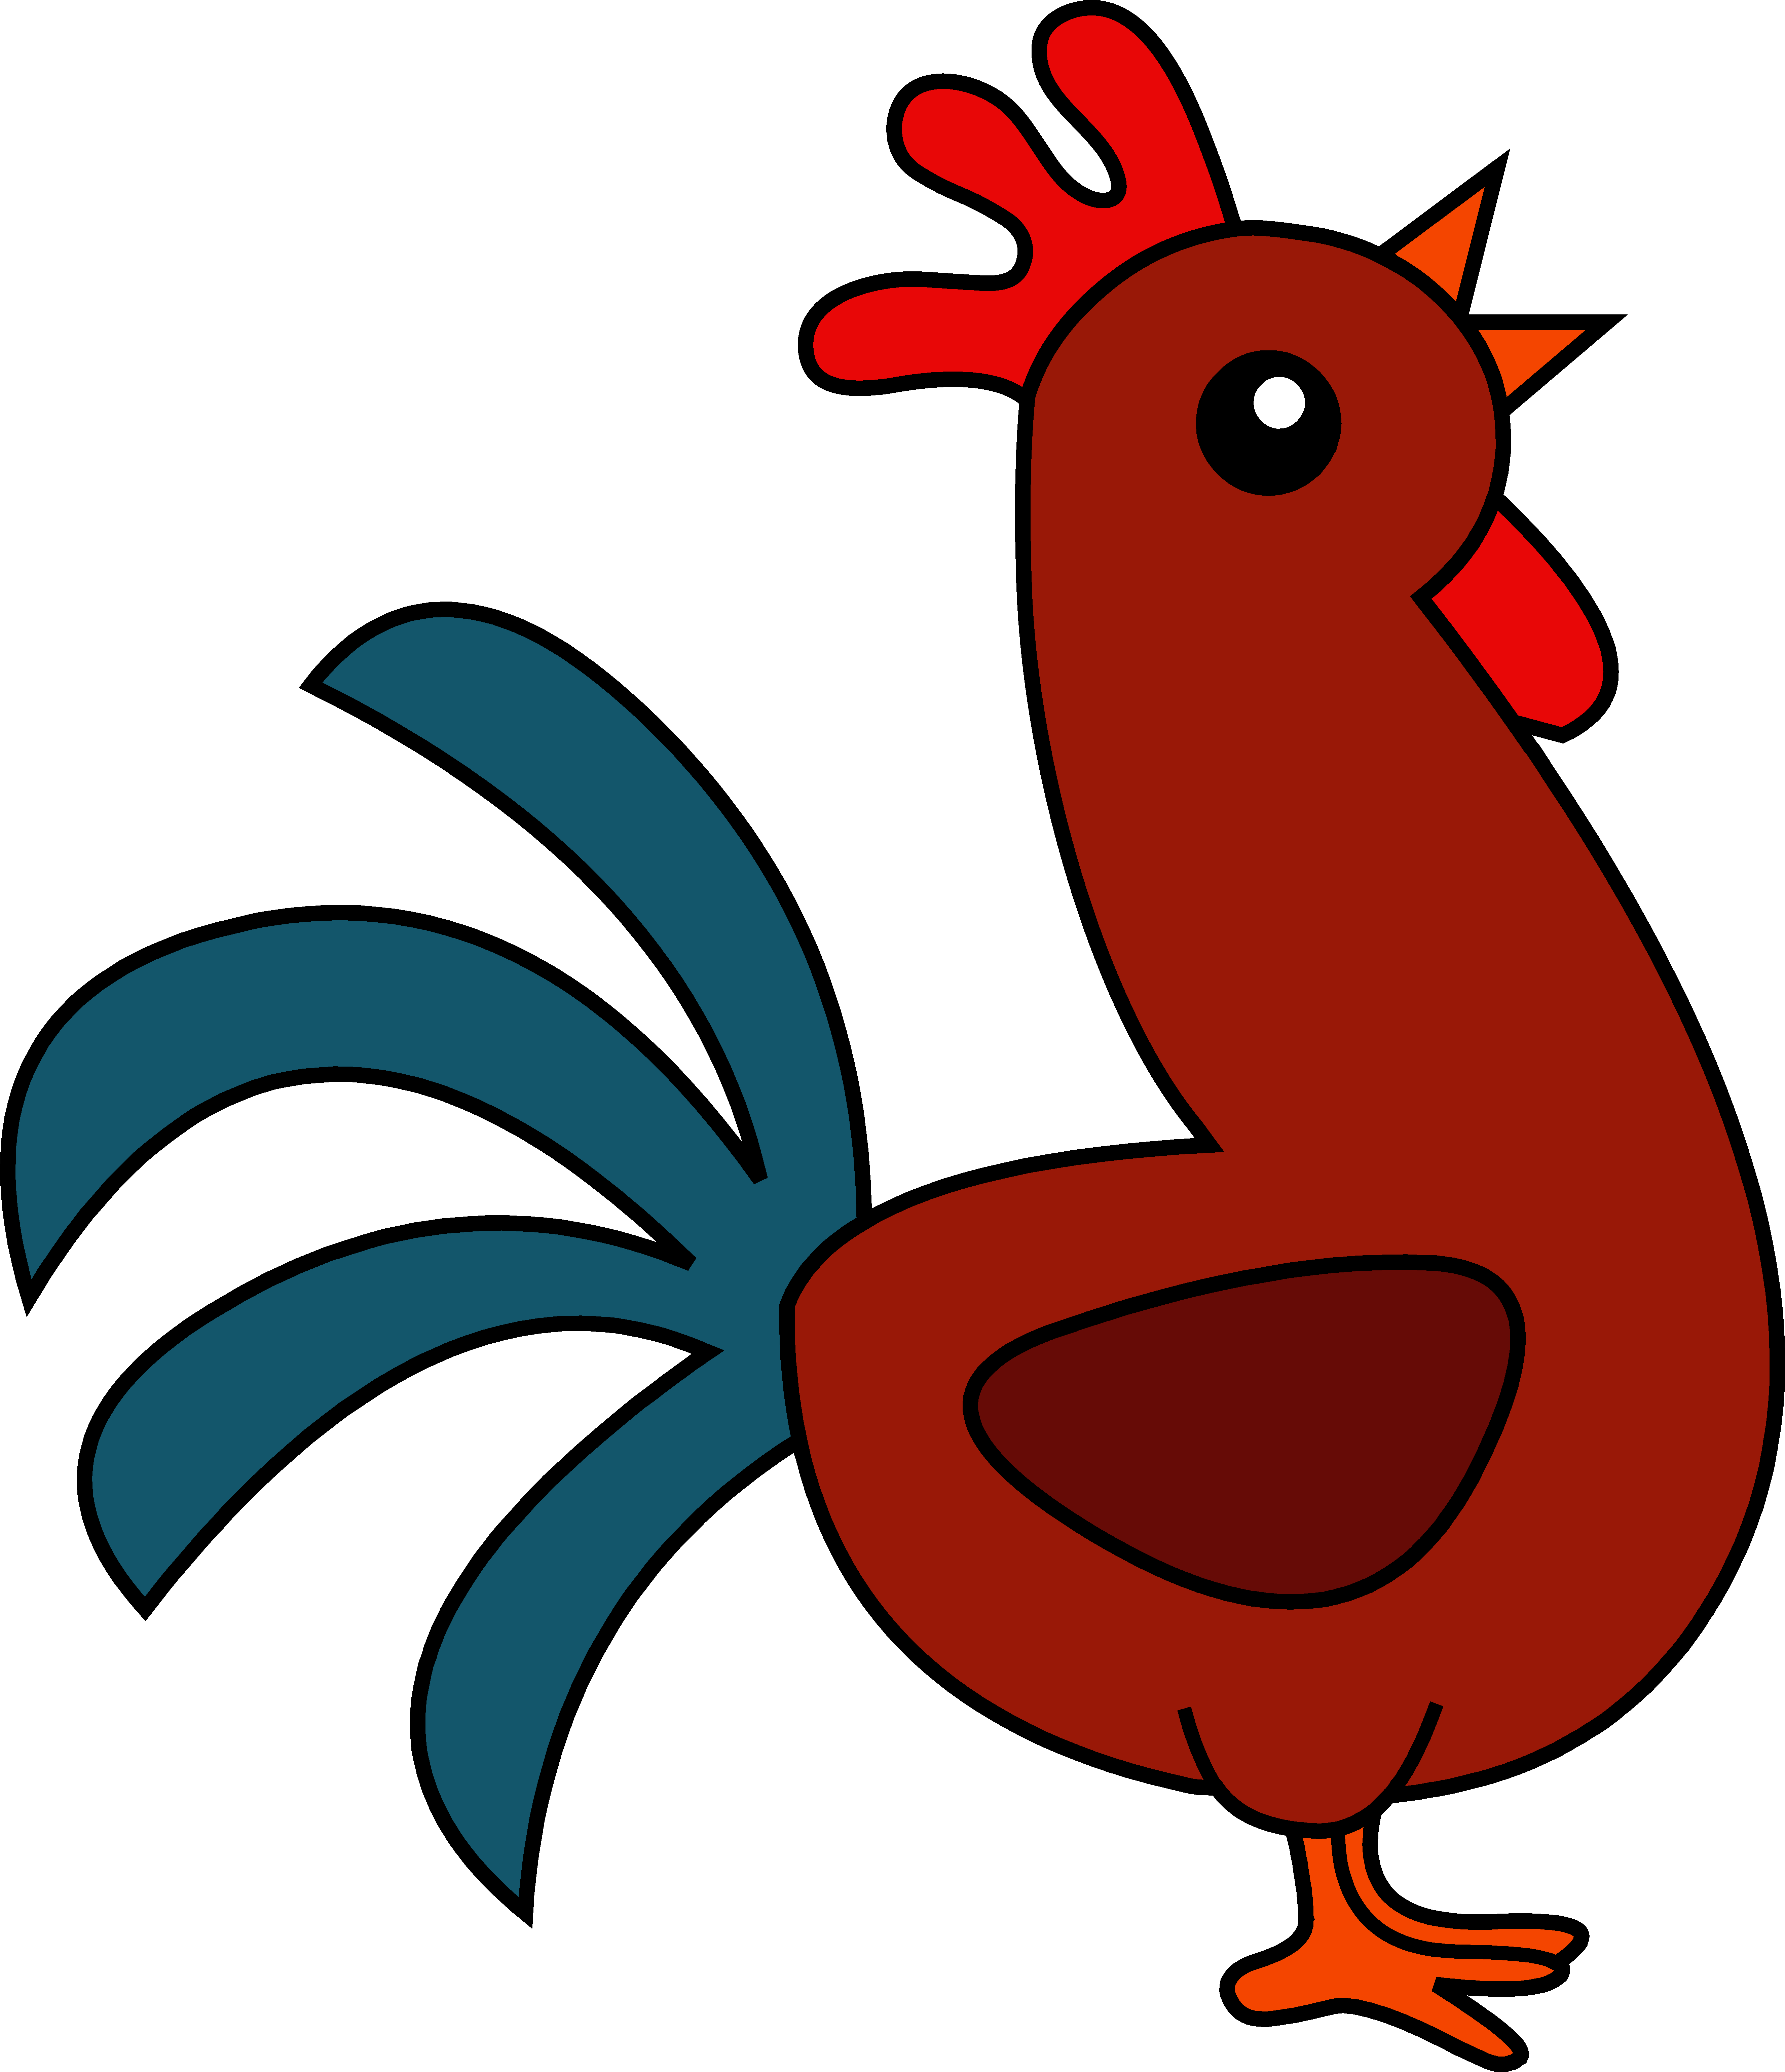 Rooster Free Clip Art Clipart - Rooster, Transparent background PNG HD thumbnail